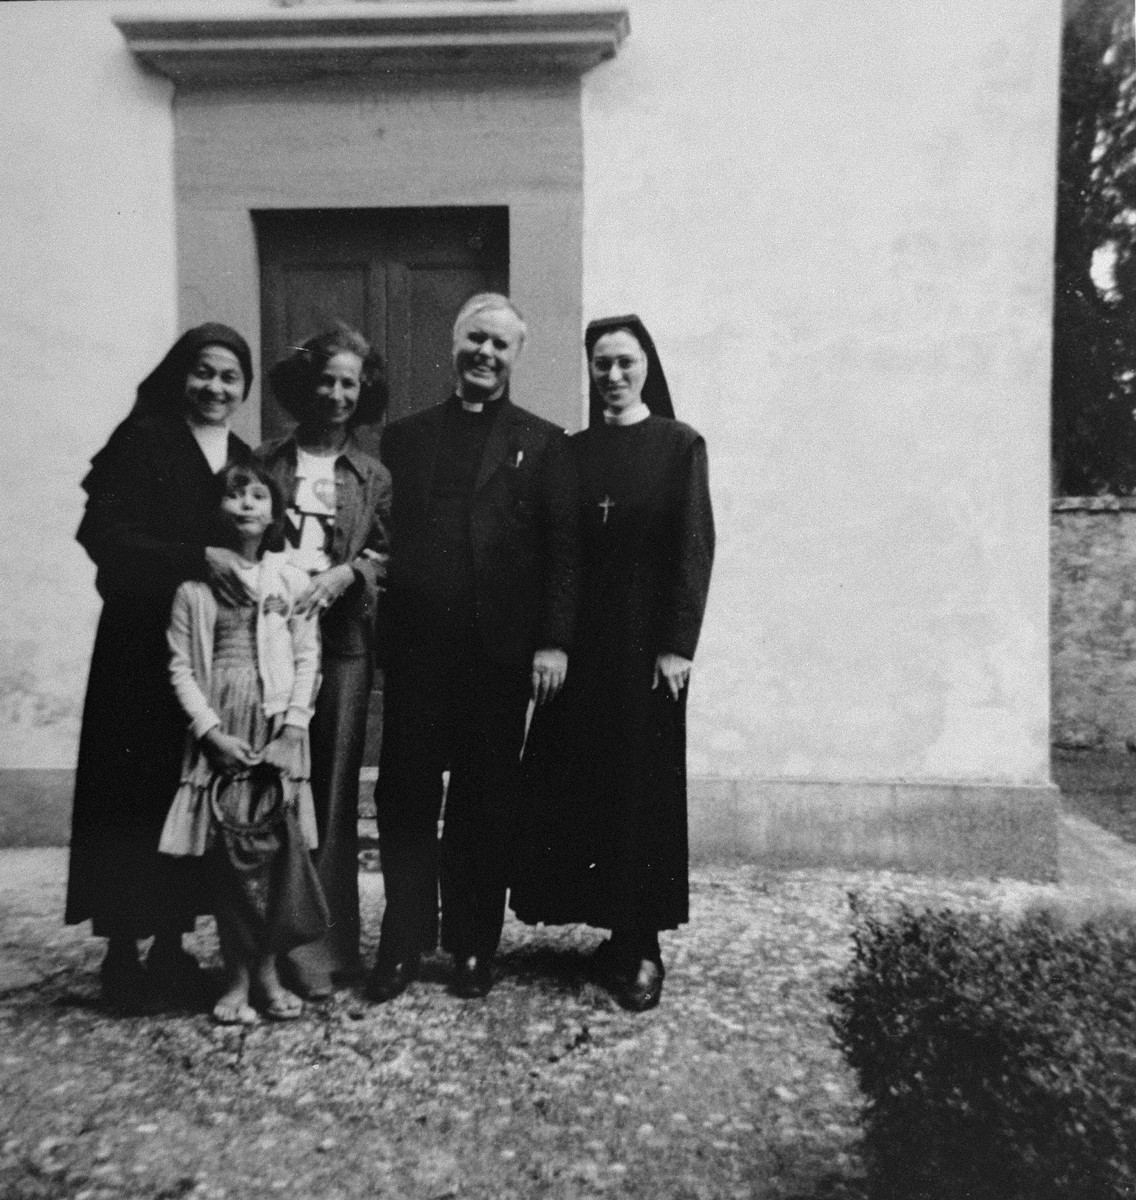 Italian rescuer Monsignor Beniamino Schivo poses with Ursula Korn Selig, a Jewish woman he had protected as a child during the German occupation of Italy.  

The group is standing in front of the oven at the villa of the Salesian nuns where Ursula and her family hid for two months in 1943.